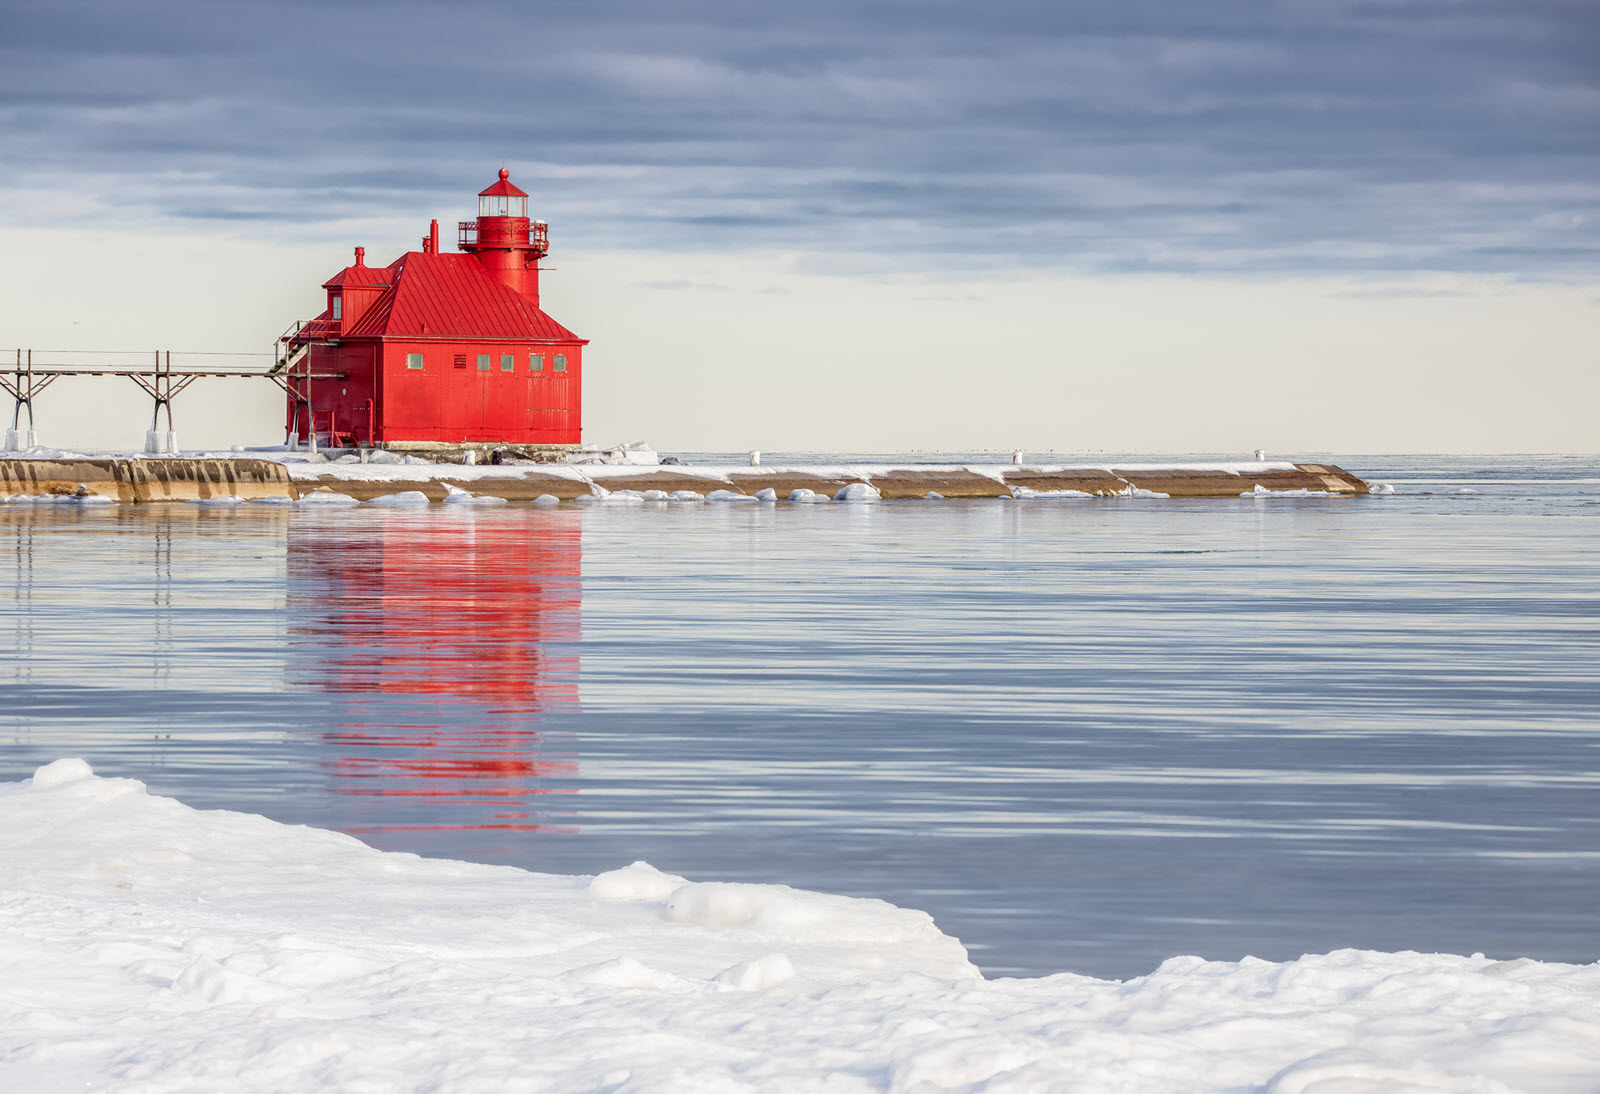 Image of red lighthouse in Sturgeon Bay, Wisconsin in Winter. Red Lighthouse is in the distance with a snow covered shoreline in the foreground.